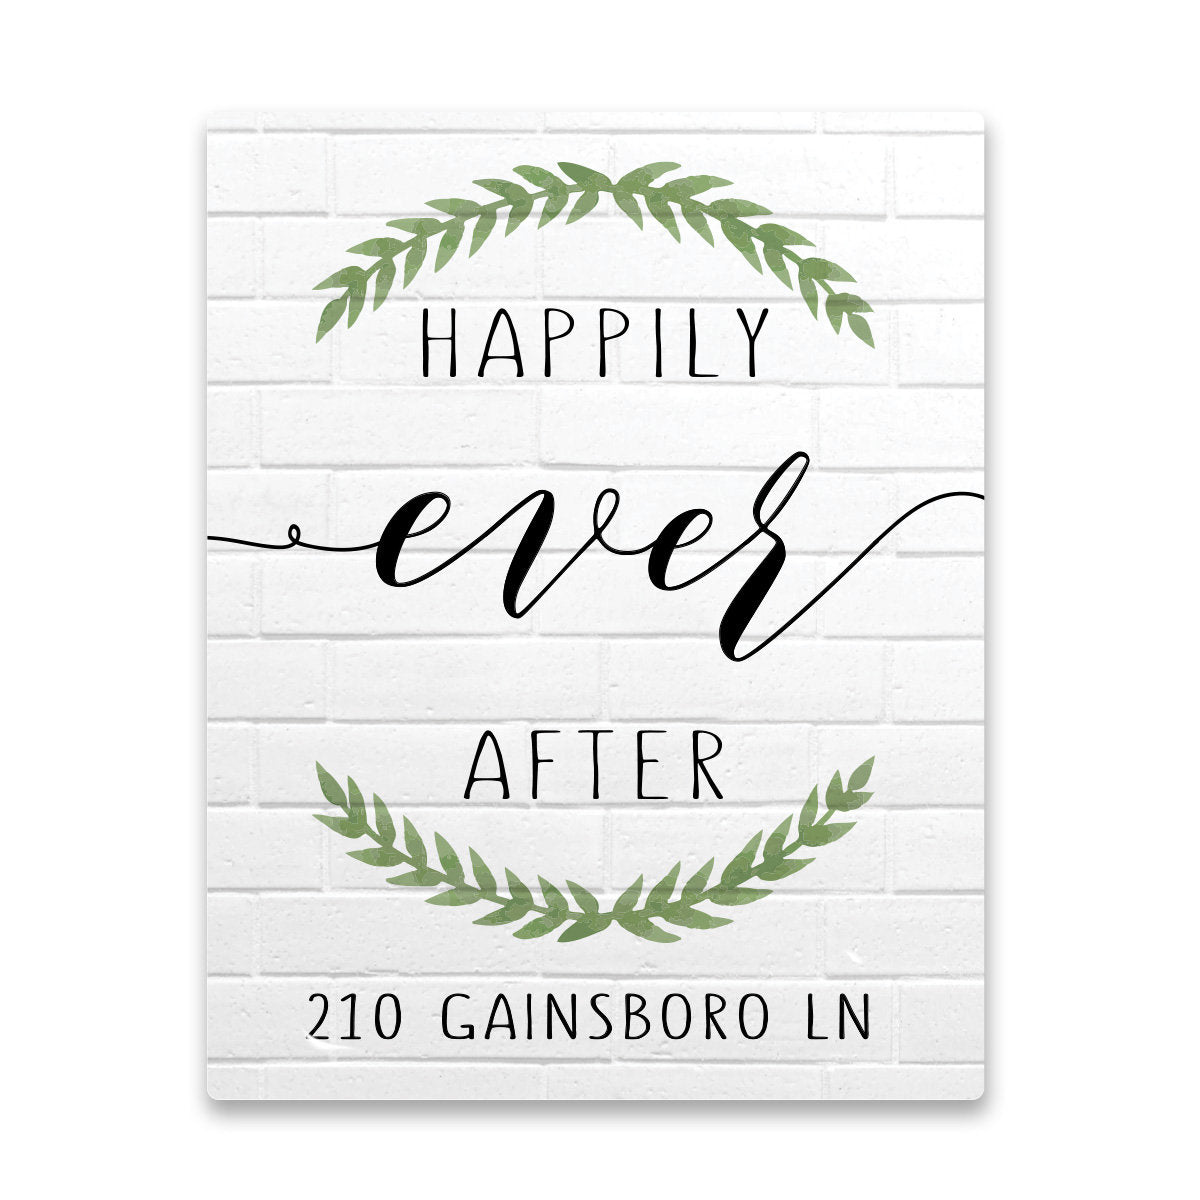 Personalized Happily Ever After with Address 11X14 Aluminum Wall Art